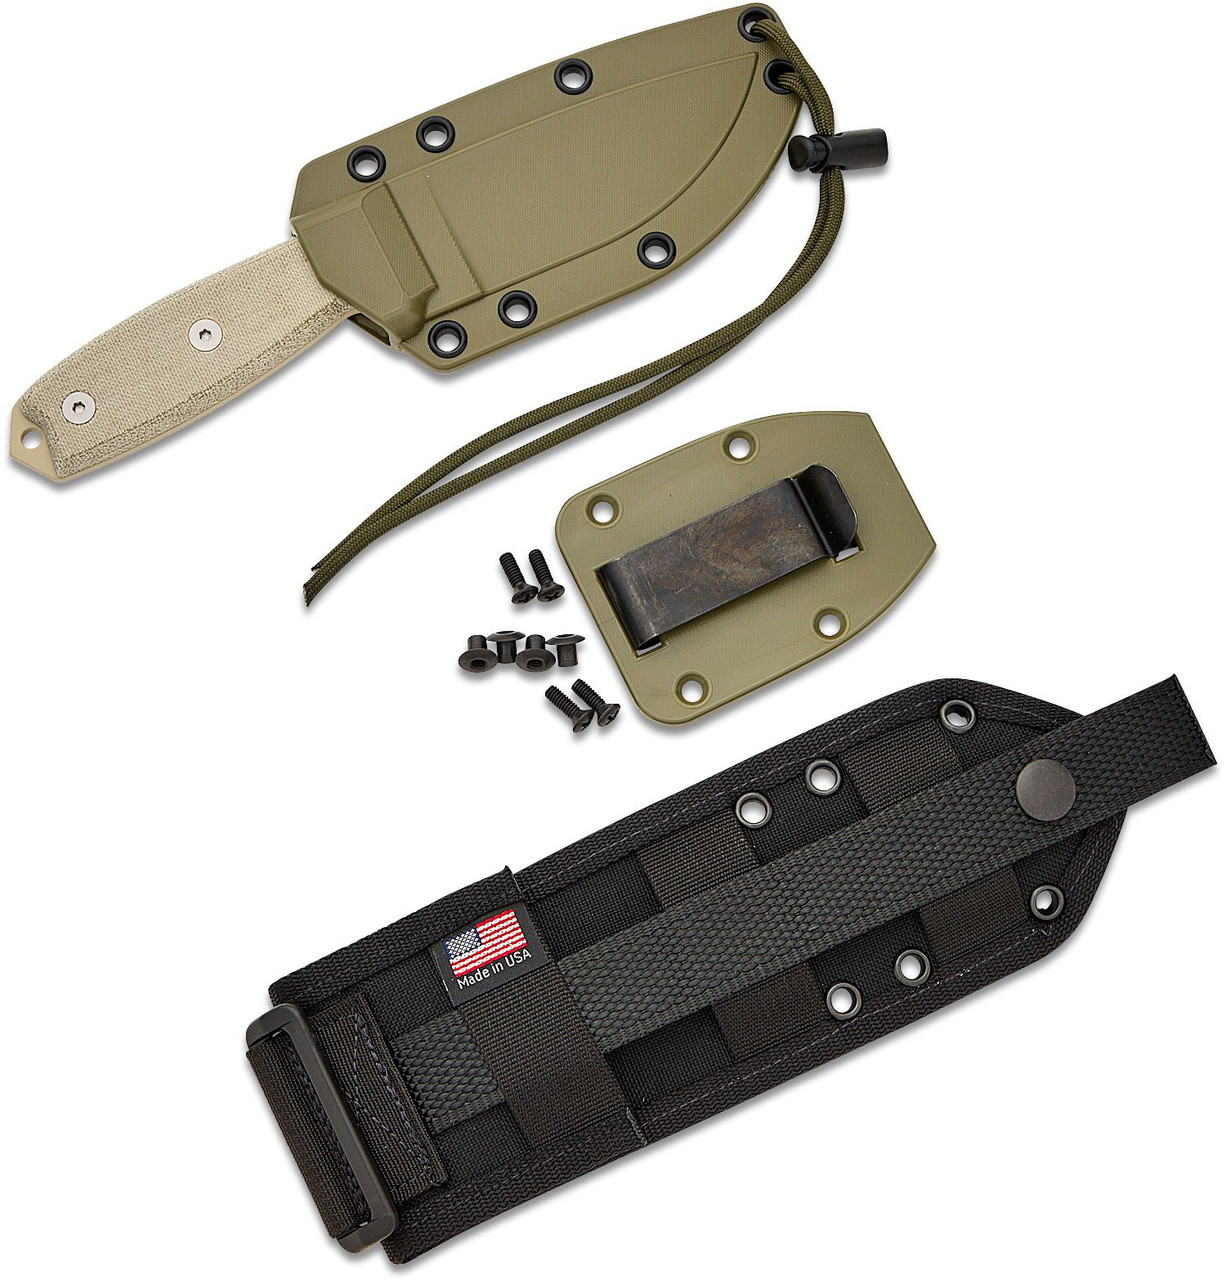 ESEE Knives ESEE-3P-MB-DT Desert Tan Plain Edge, OD Green Sheath, MOLLE Back and Clip Plate